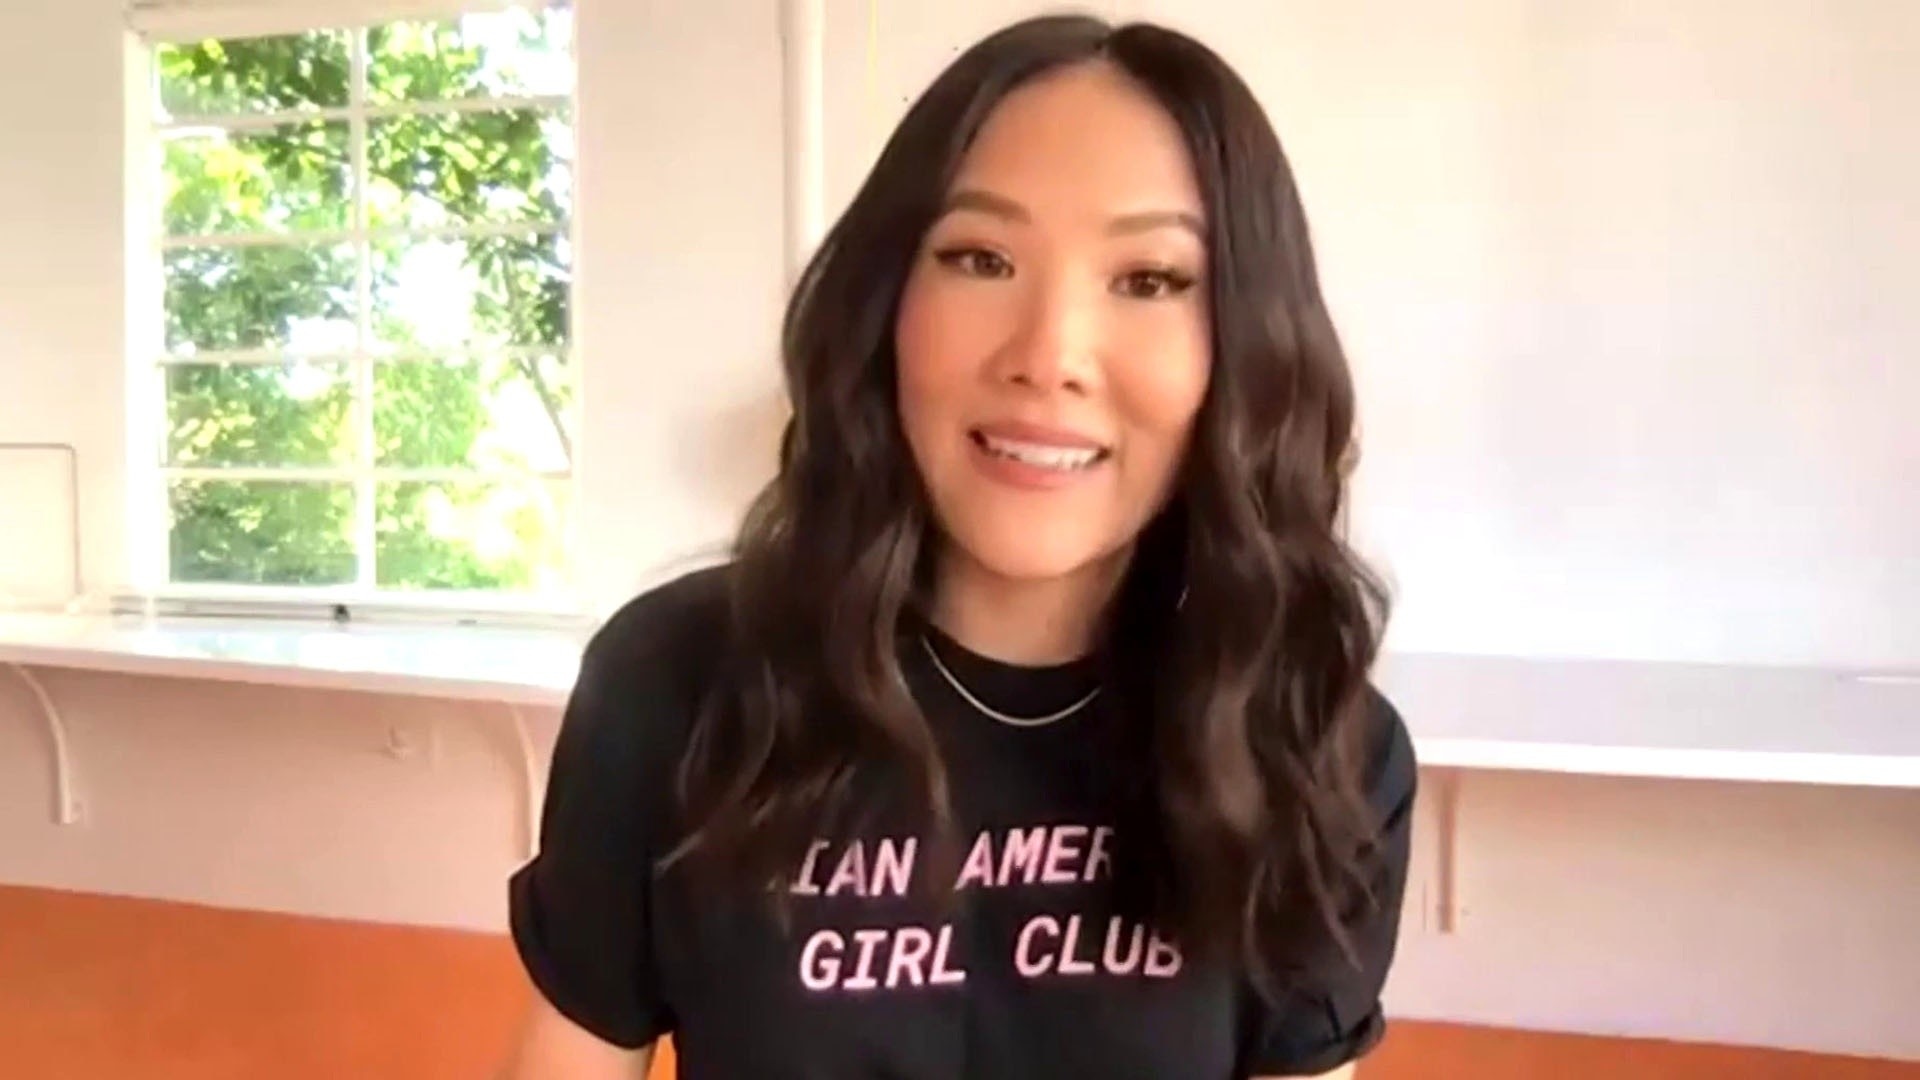 Watch Today Highlight Ally Maki Creates Club To Celebrate Asian American Girls